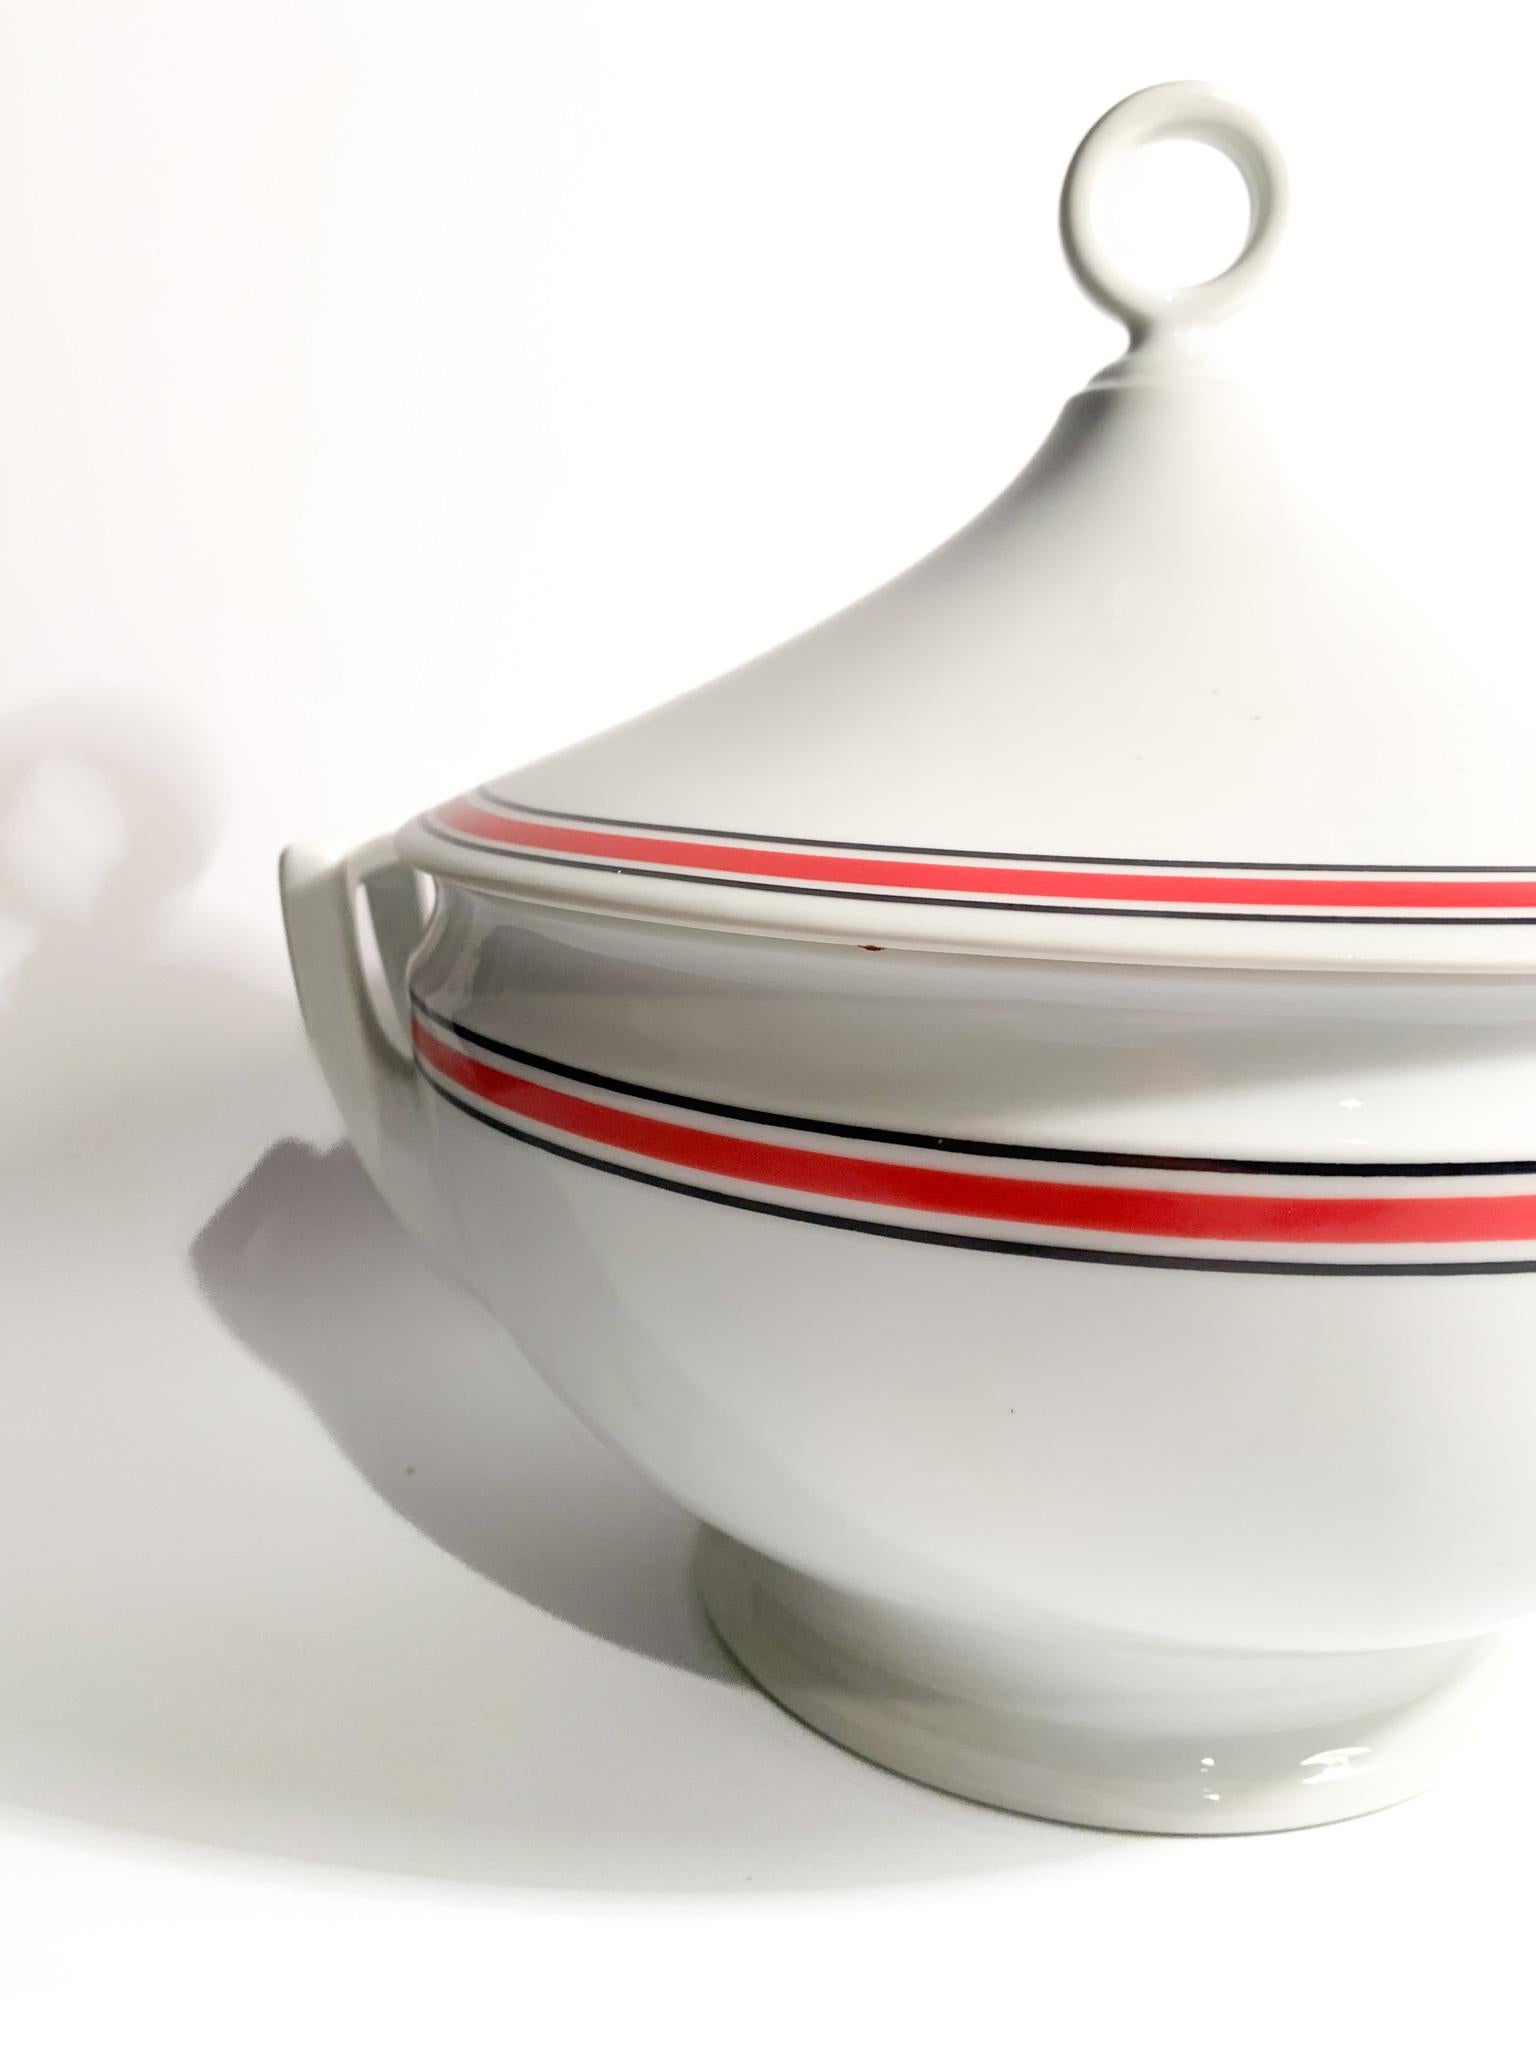 Late 20th Century Porcelain Soup Tureen by Gio Ponti for Richard Ginori, Impero Collection 1976